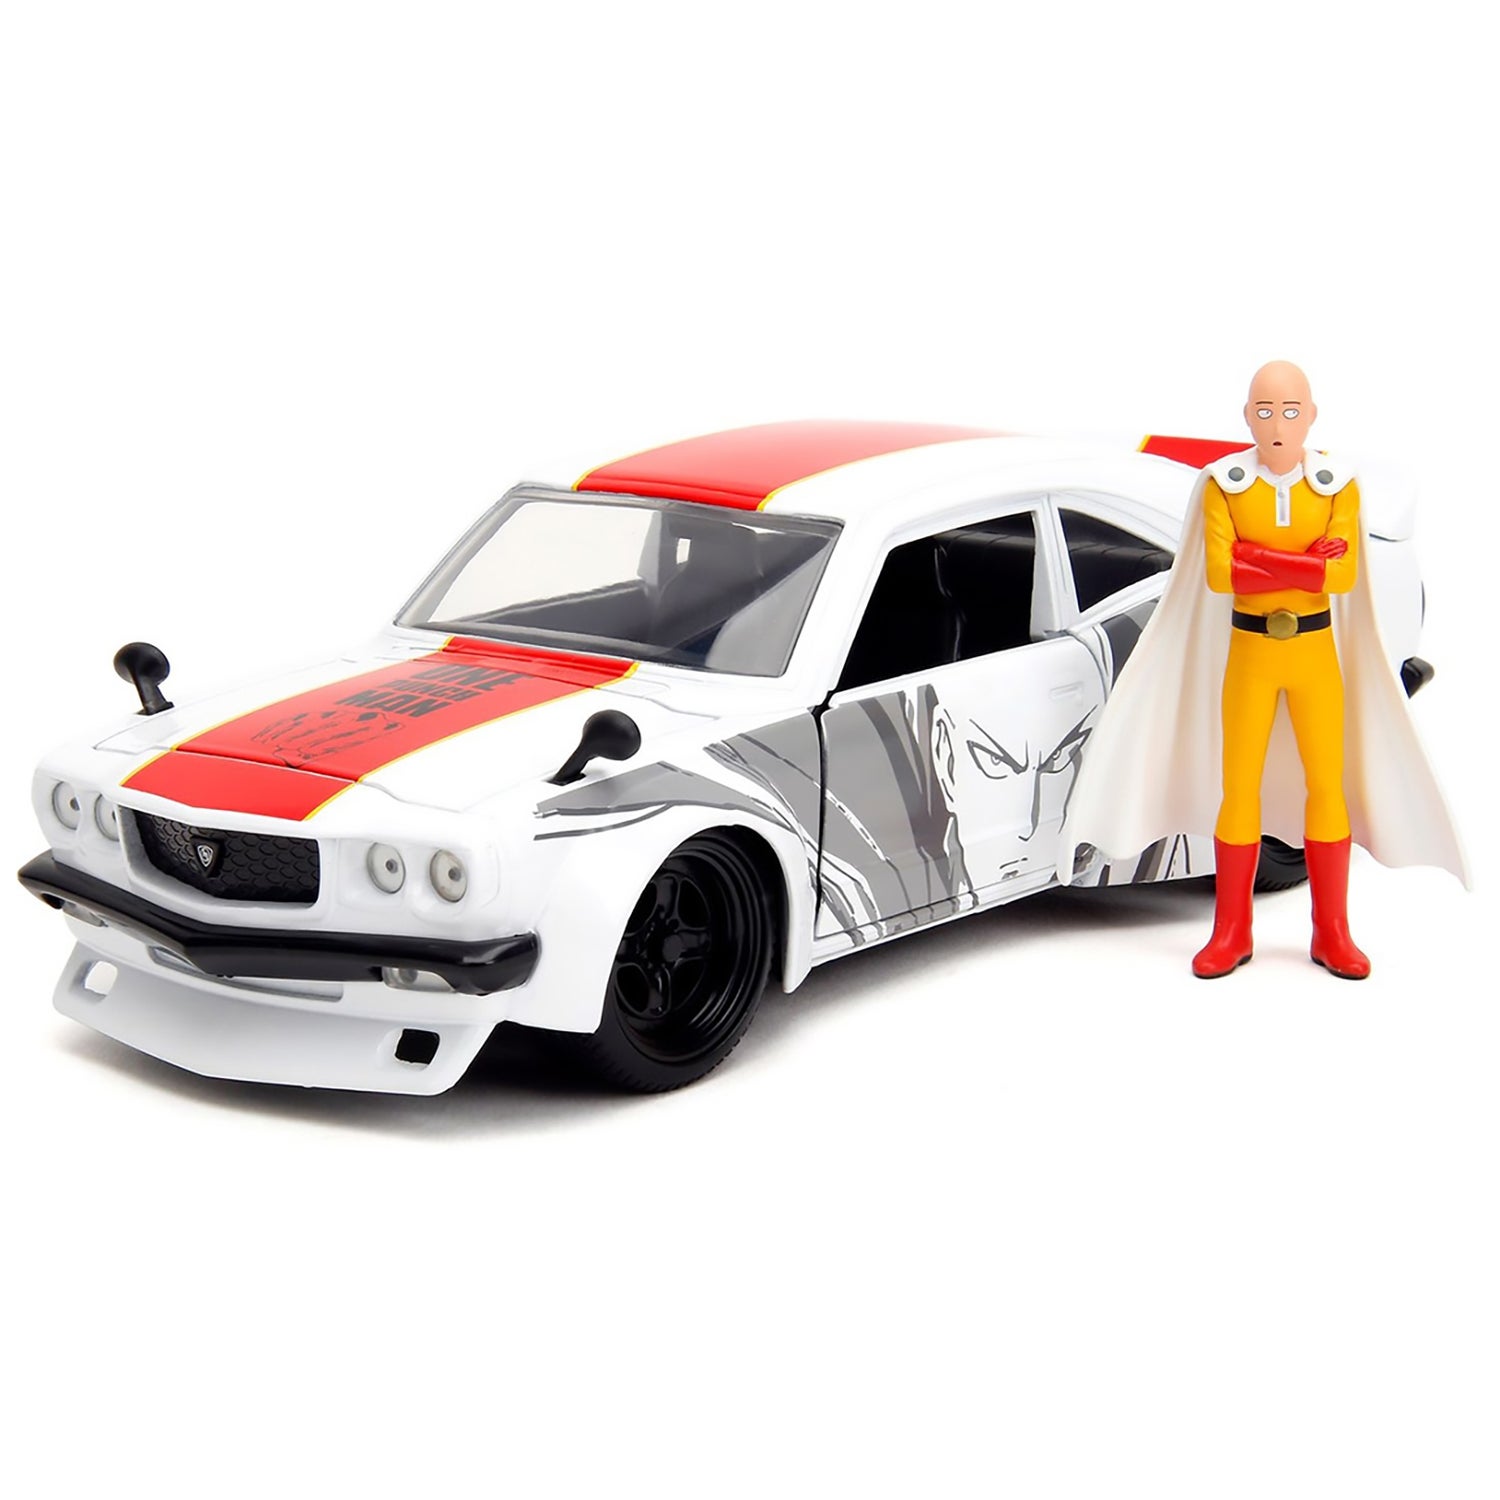 Jada Hollywood Rides 1:24 Scale Diecast 1974 Mazda RX-3 with One Punch Man Figure